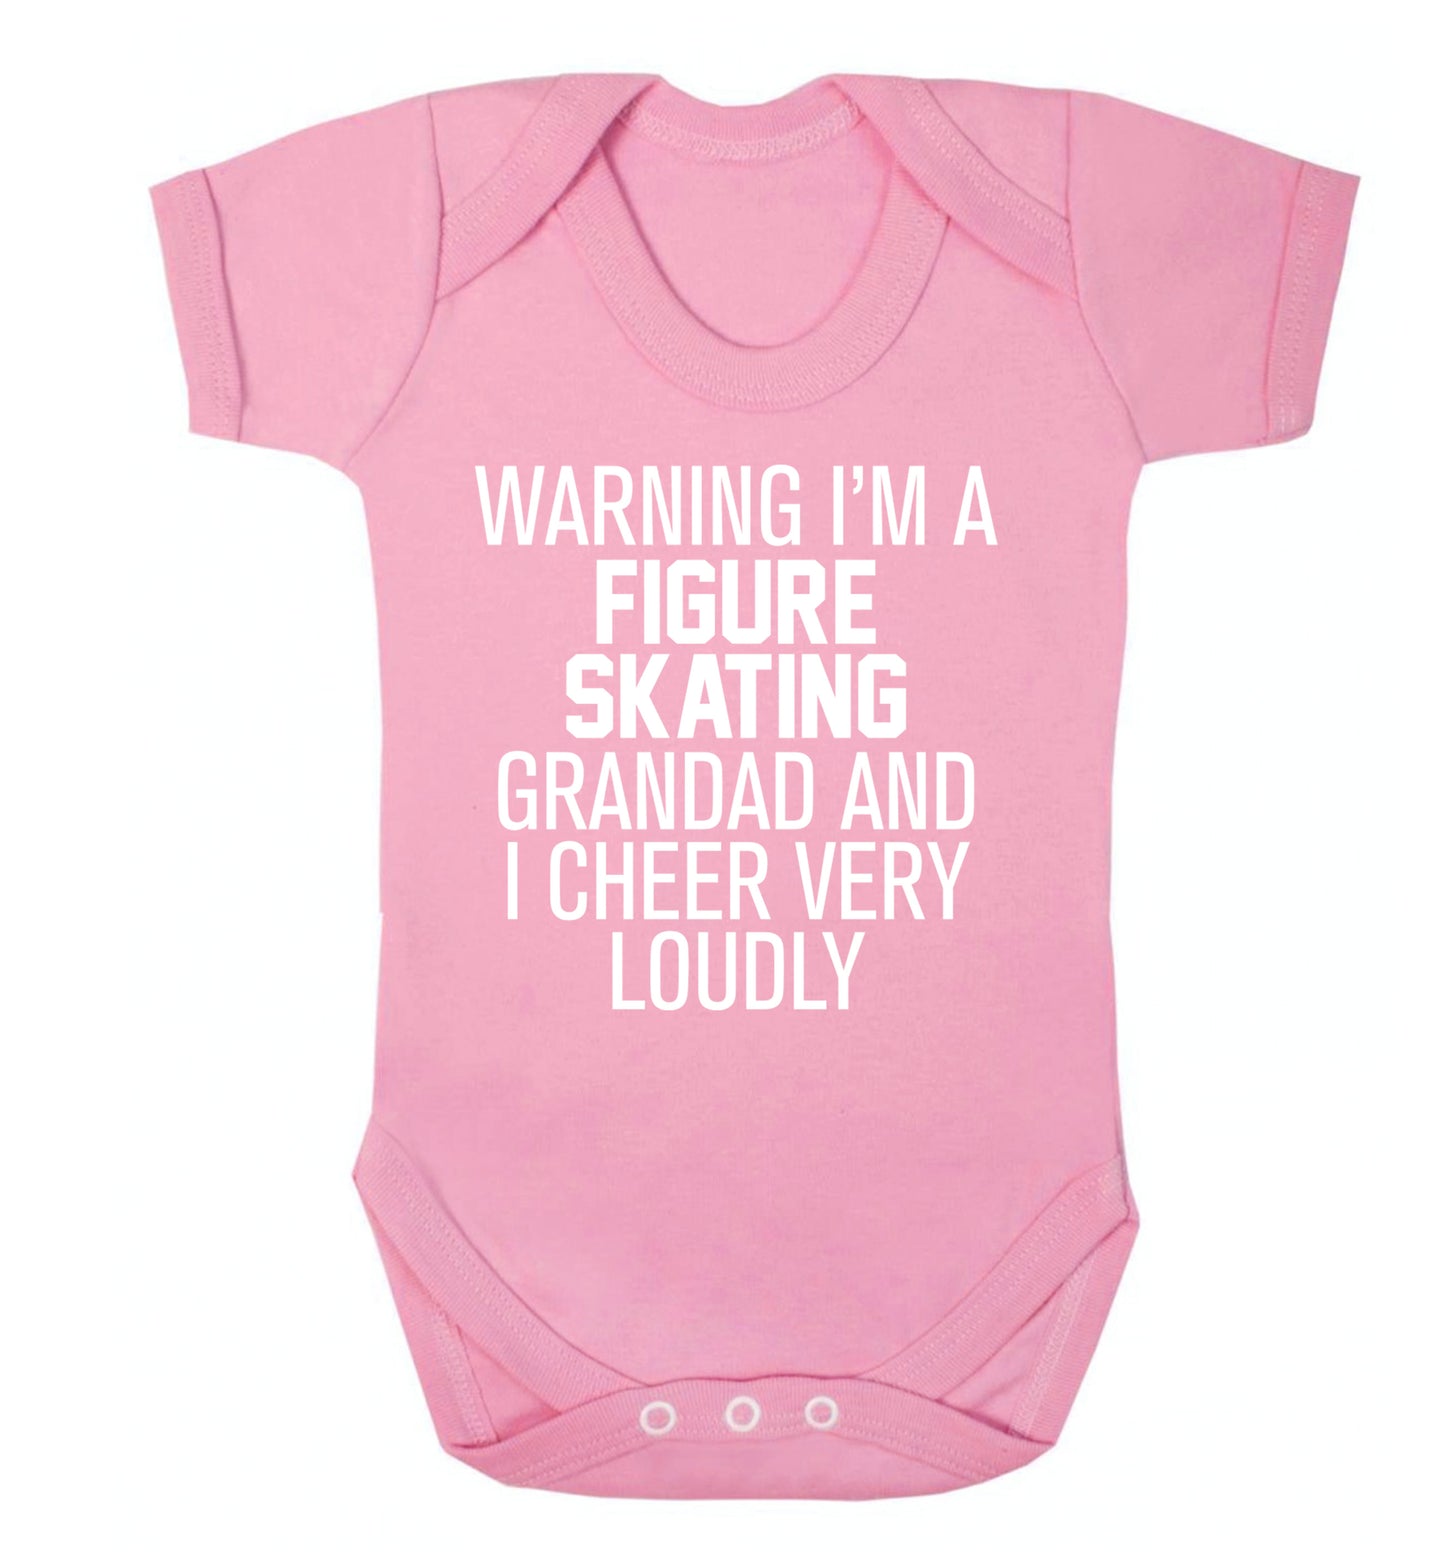 Warning I'm a figure skating grandad and I cheer very loudly Baby Vest pale pink 18-24 months